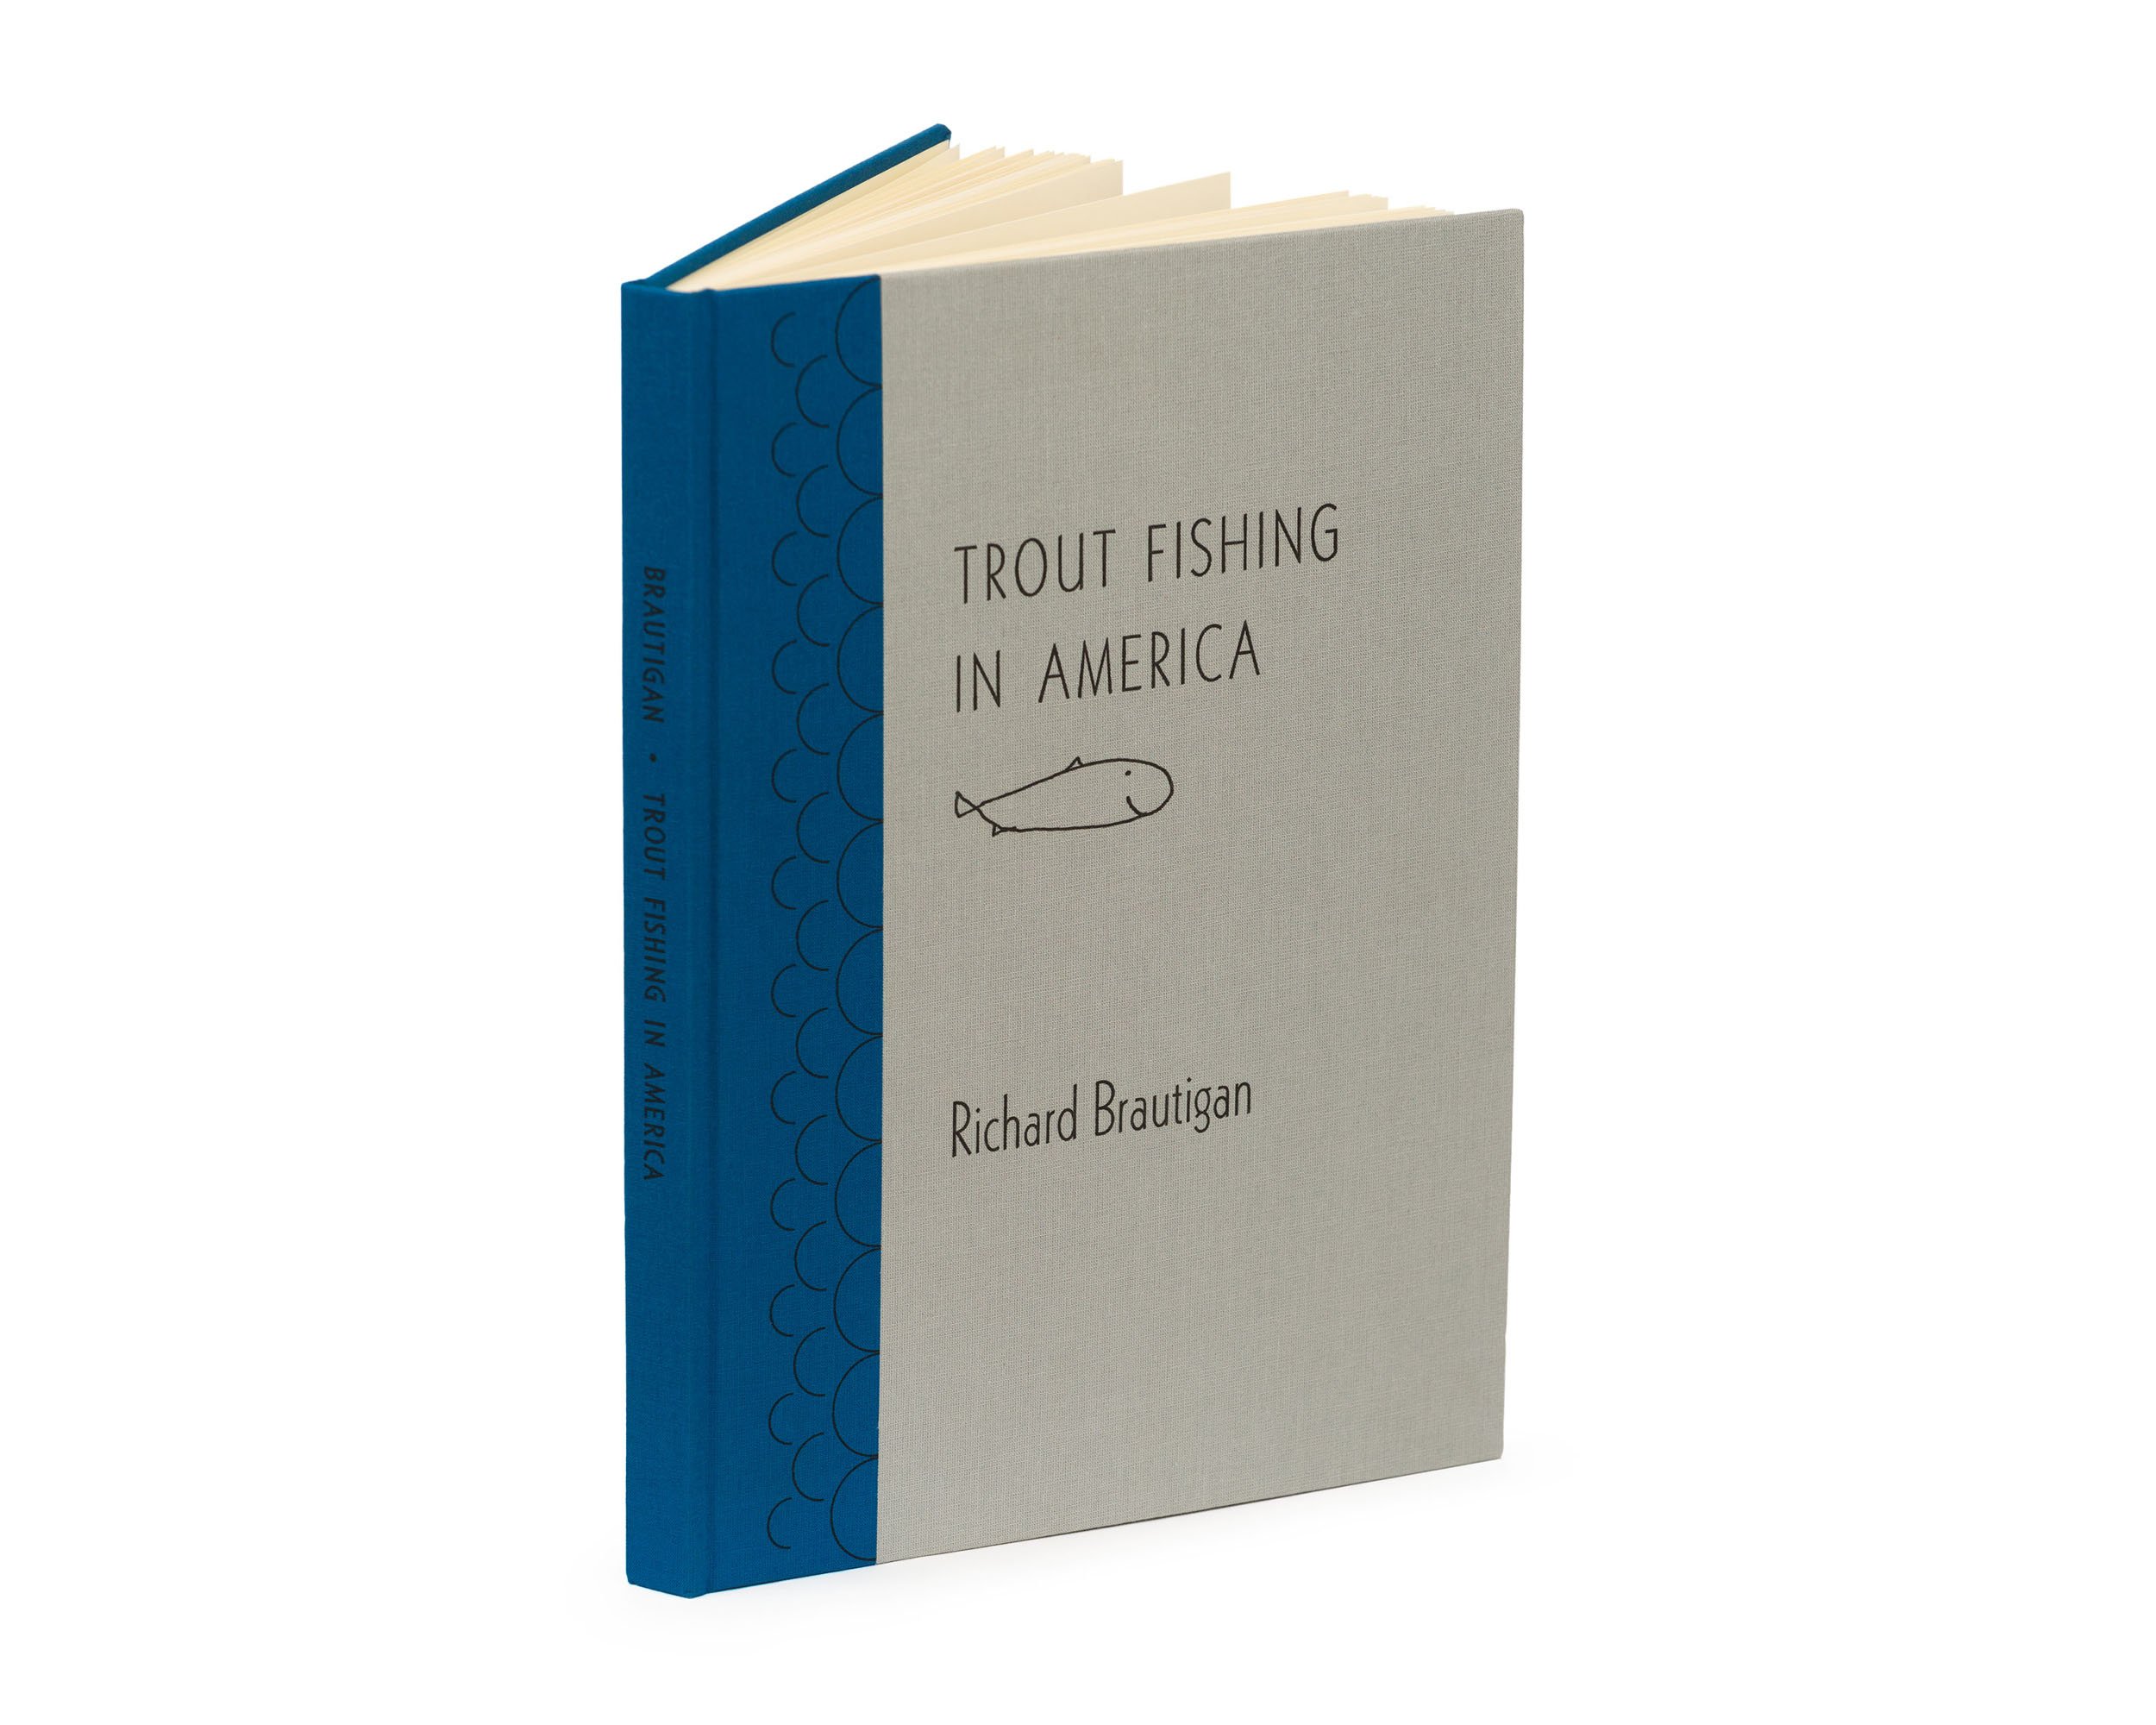 Trout Fishing in America by Richard Brautigan